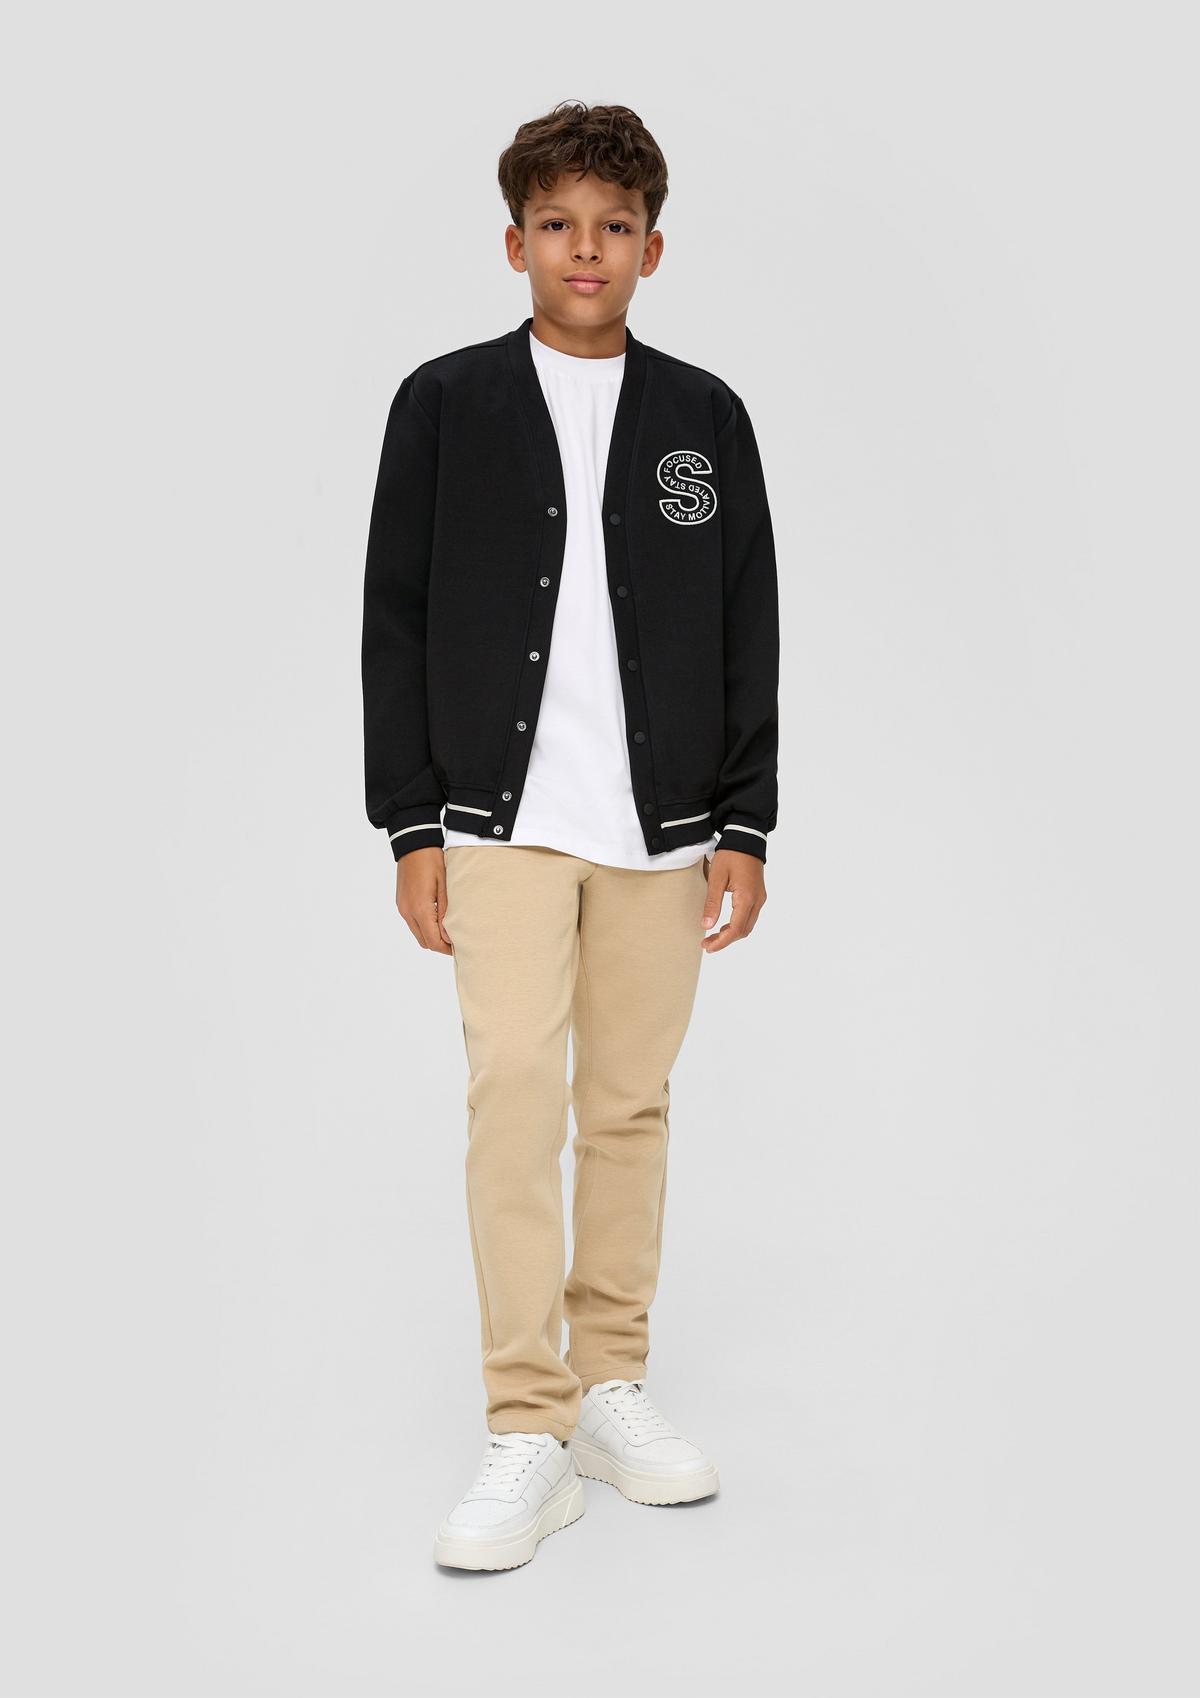 s.Oliver Sweatshirt jacket in a college style